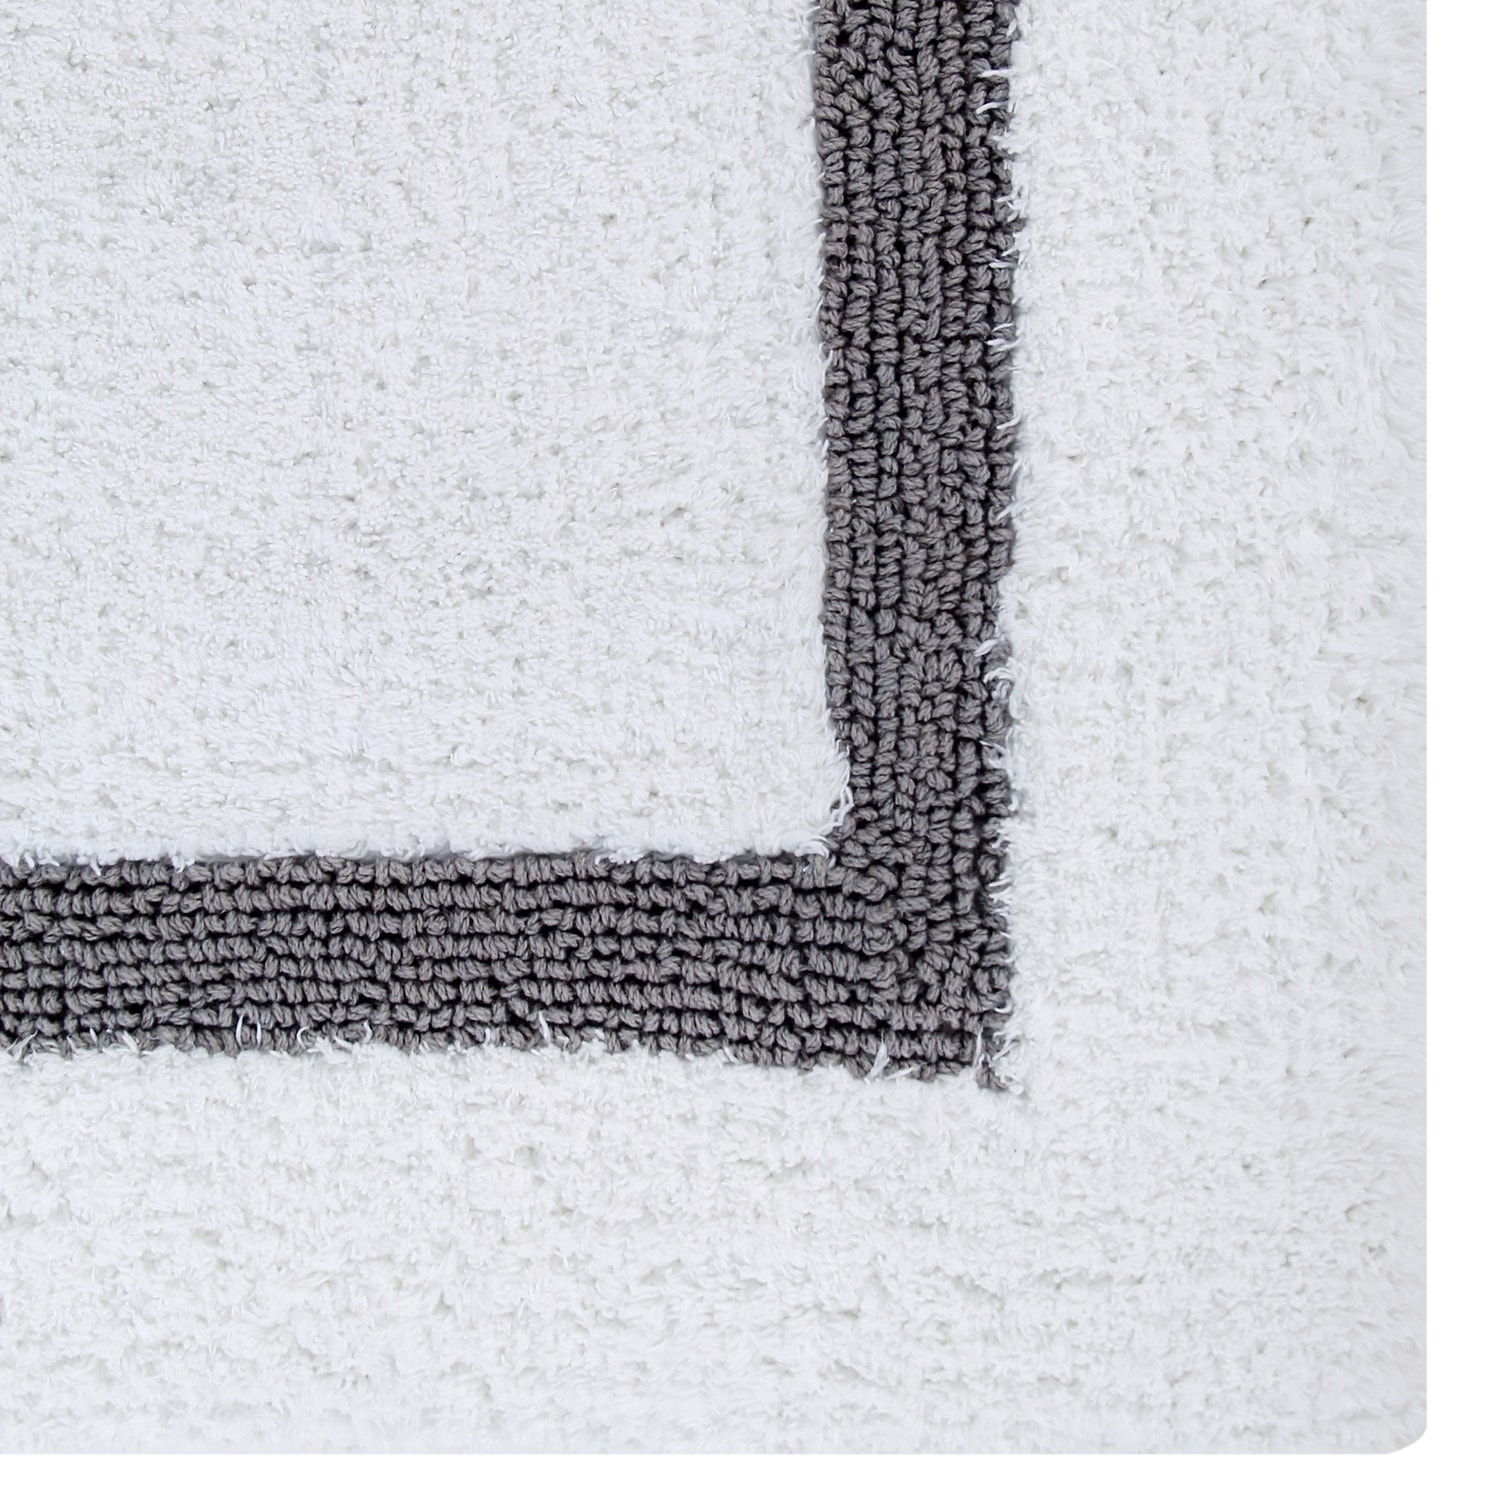 https://ak1.ostkcdn.com/images/products/is/images/direct/1ef835fdfe3e5257df171ad98180eabfb417ead0/Better-Trends-Hotel-Collection-Reversible-Double-Sided-Bath-Mat-Rug.jpg